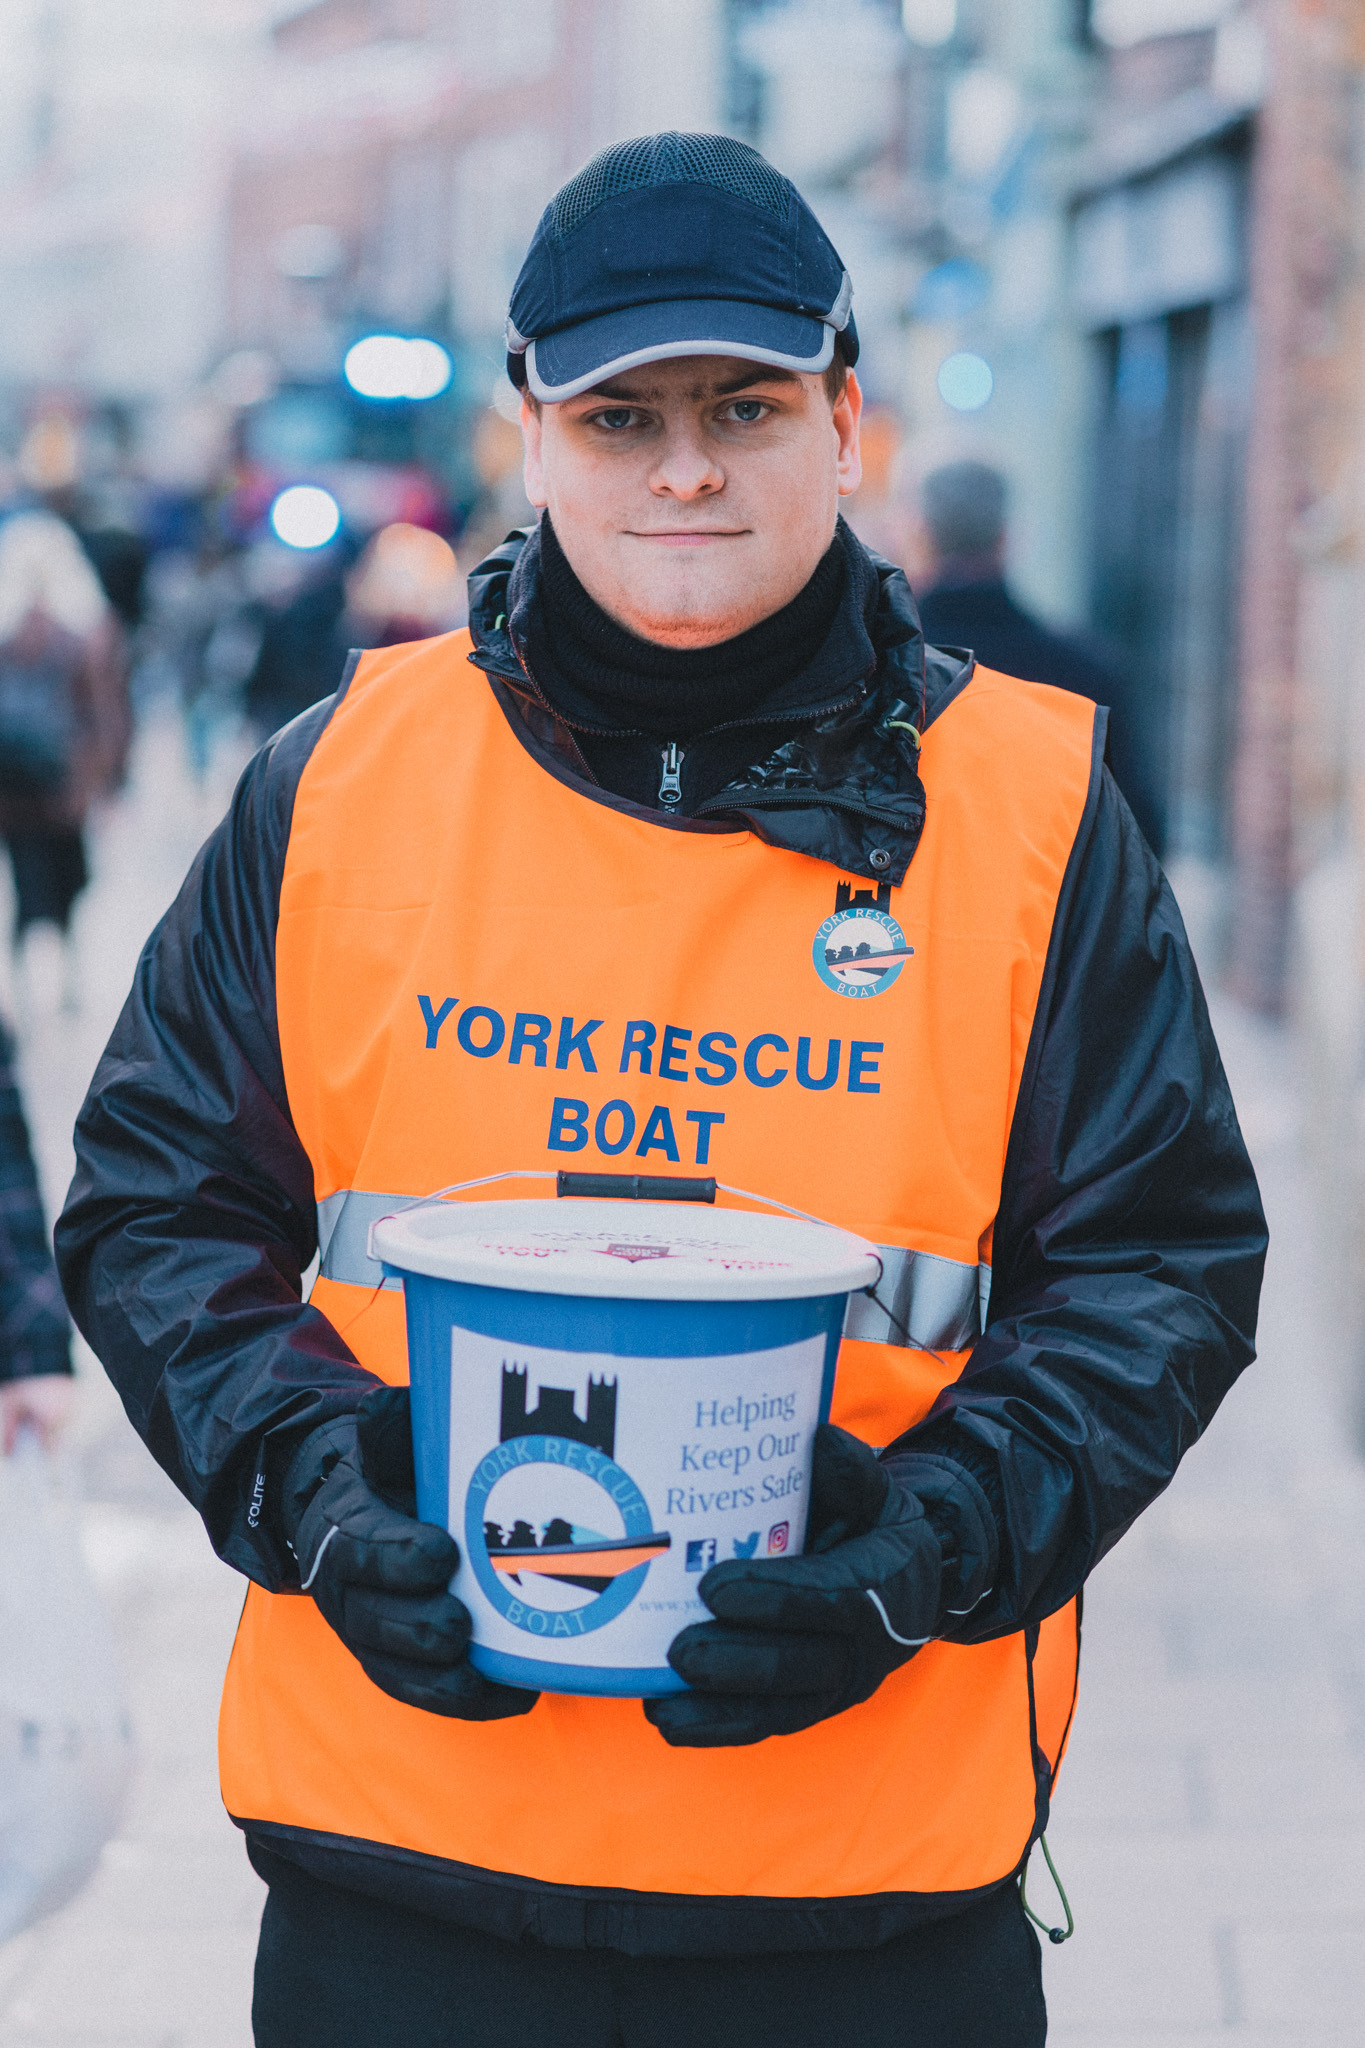 York Rescue Boat team goes orange to raise funds